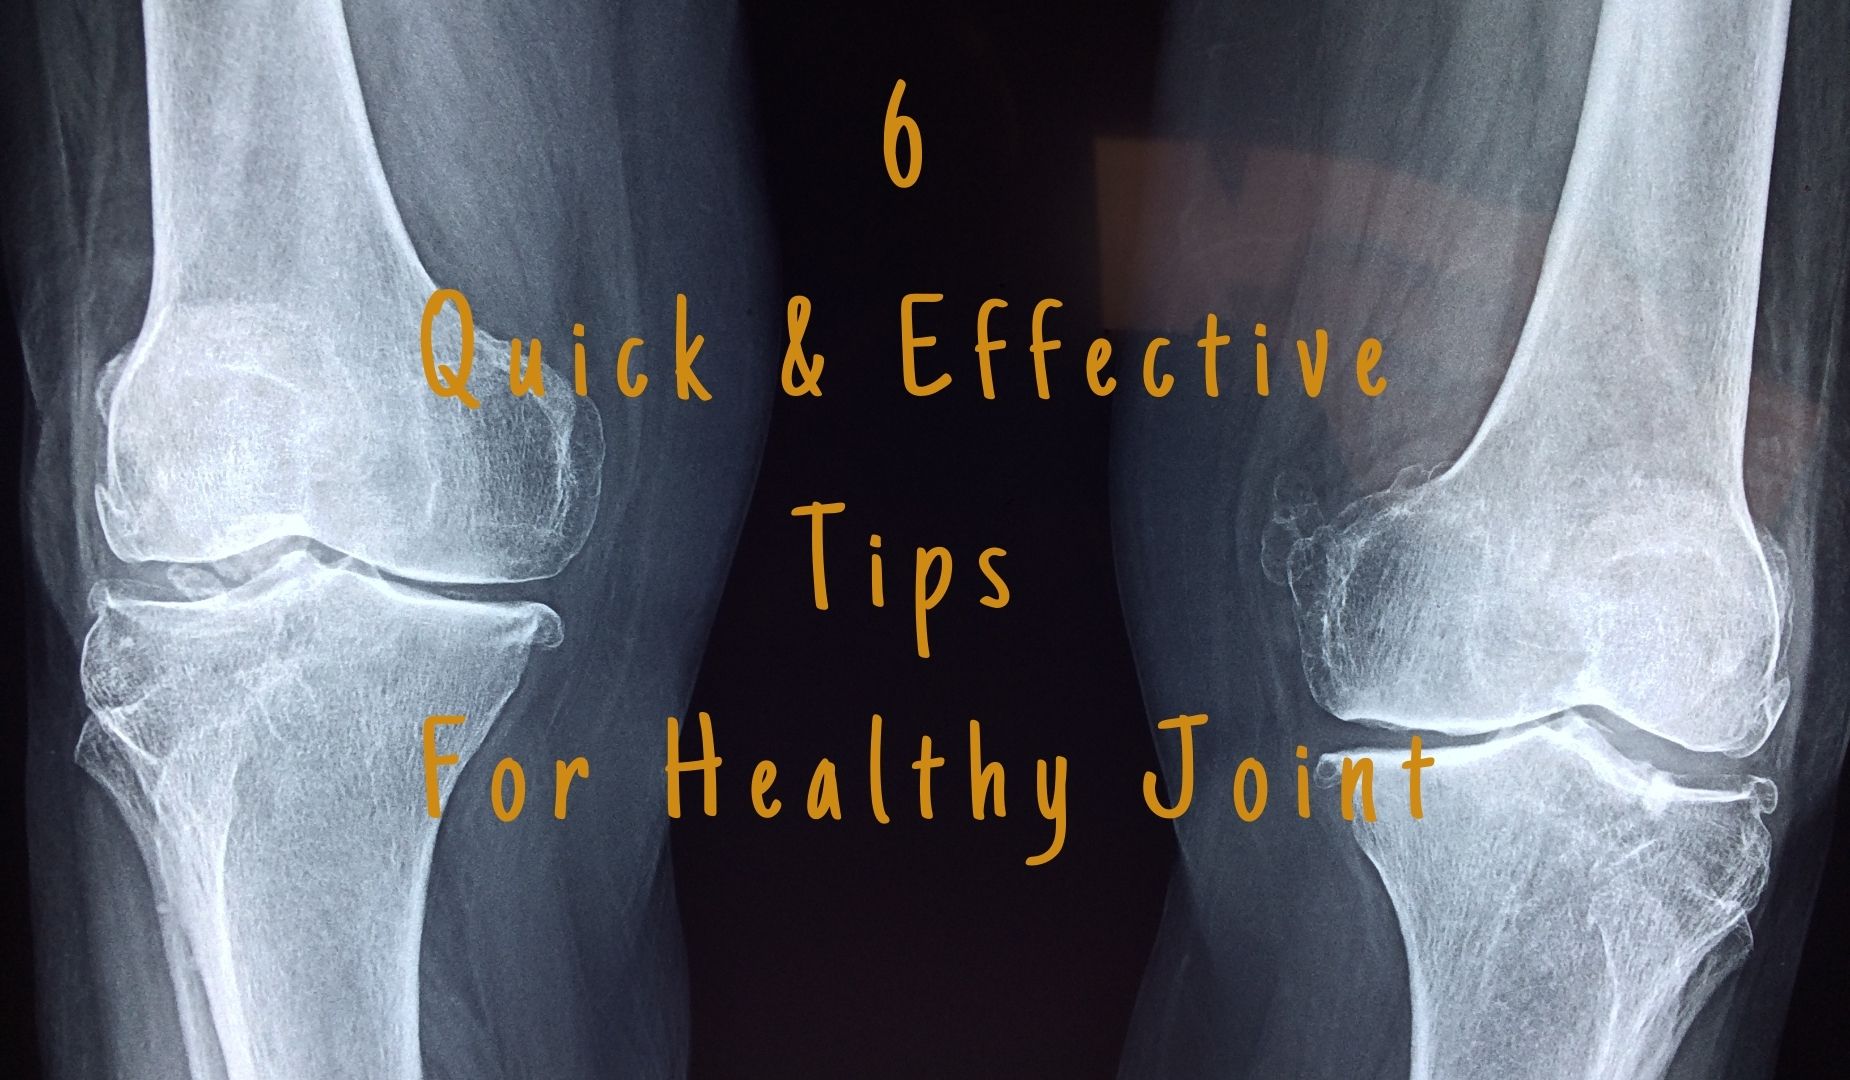 6 Quick and Effective Tips for Healthy Joint